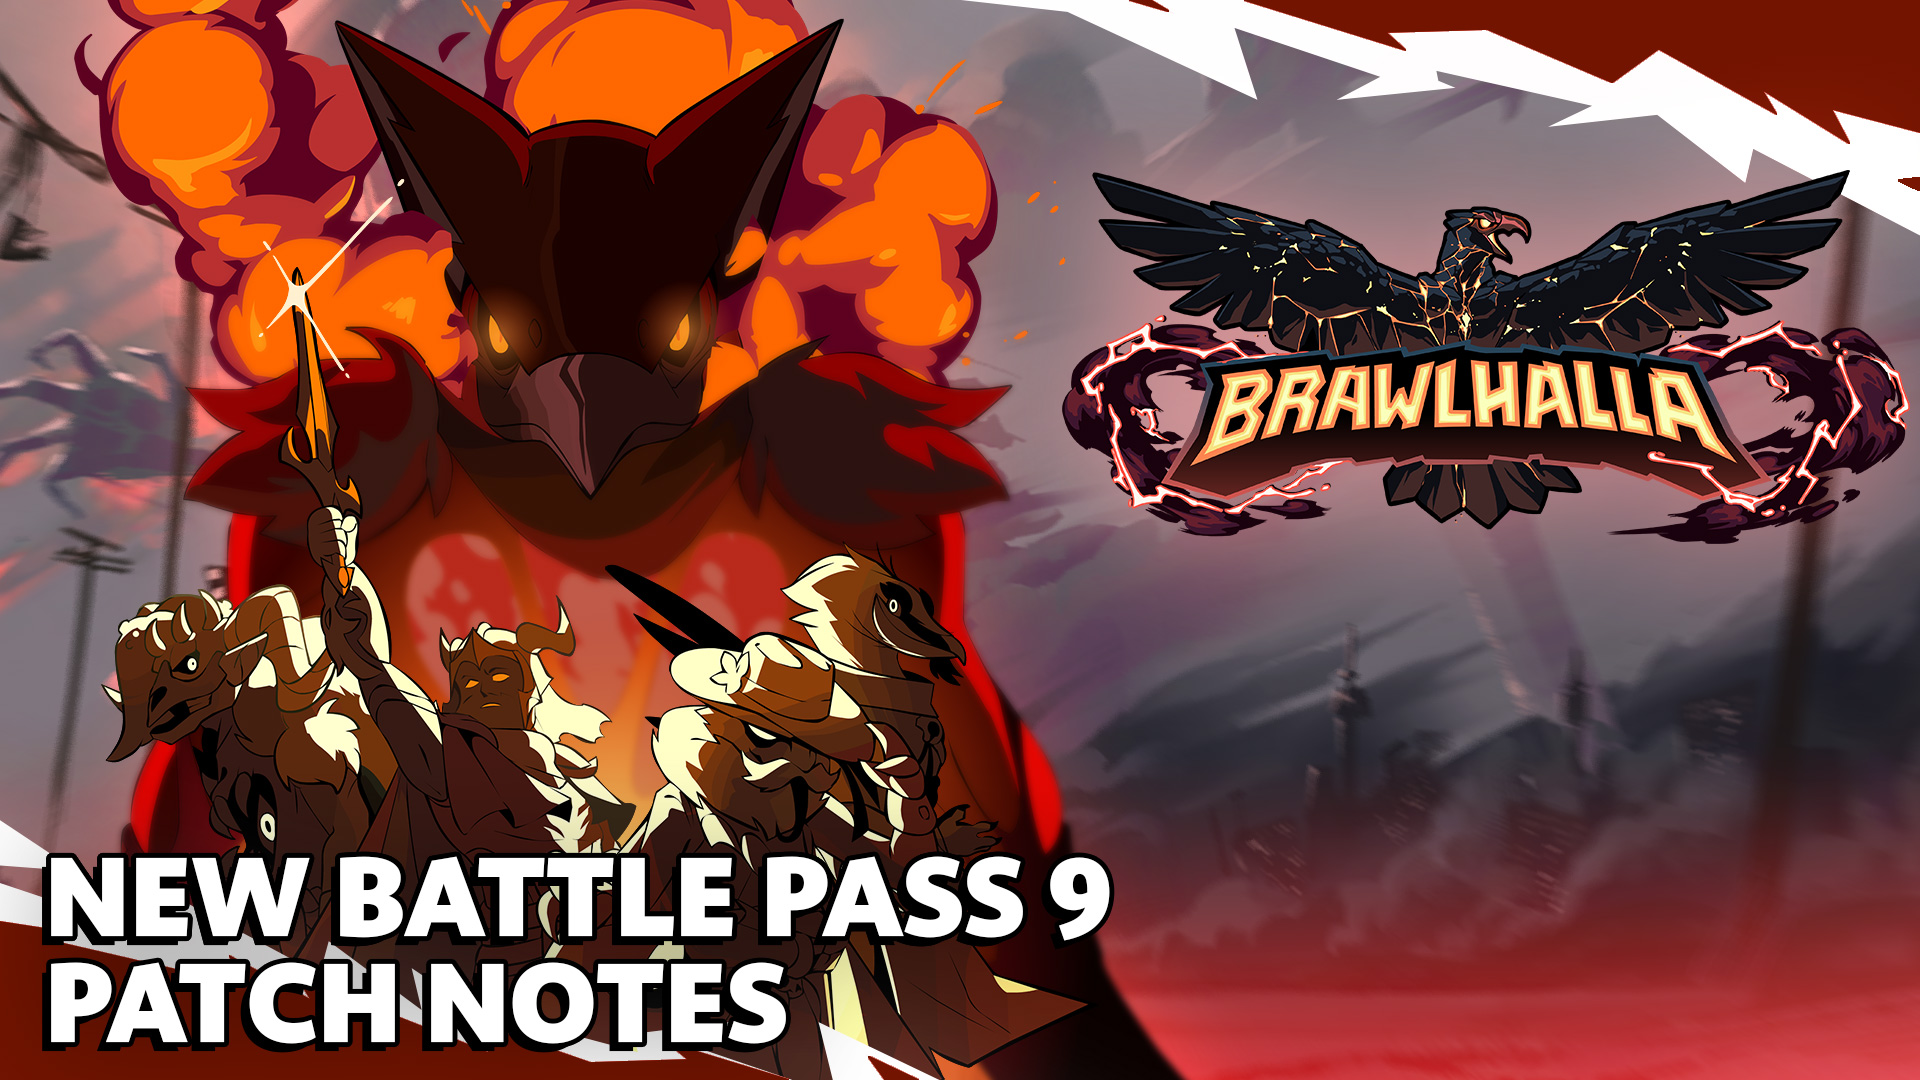 Battle Pass 9, New Test Feature, and Challenges! – Patch 8.05